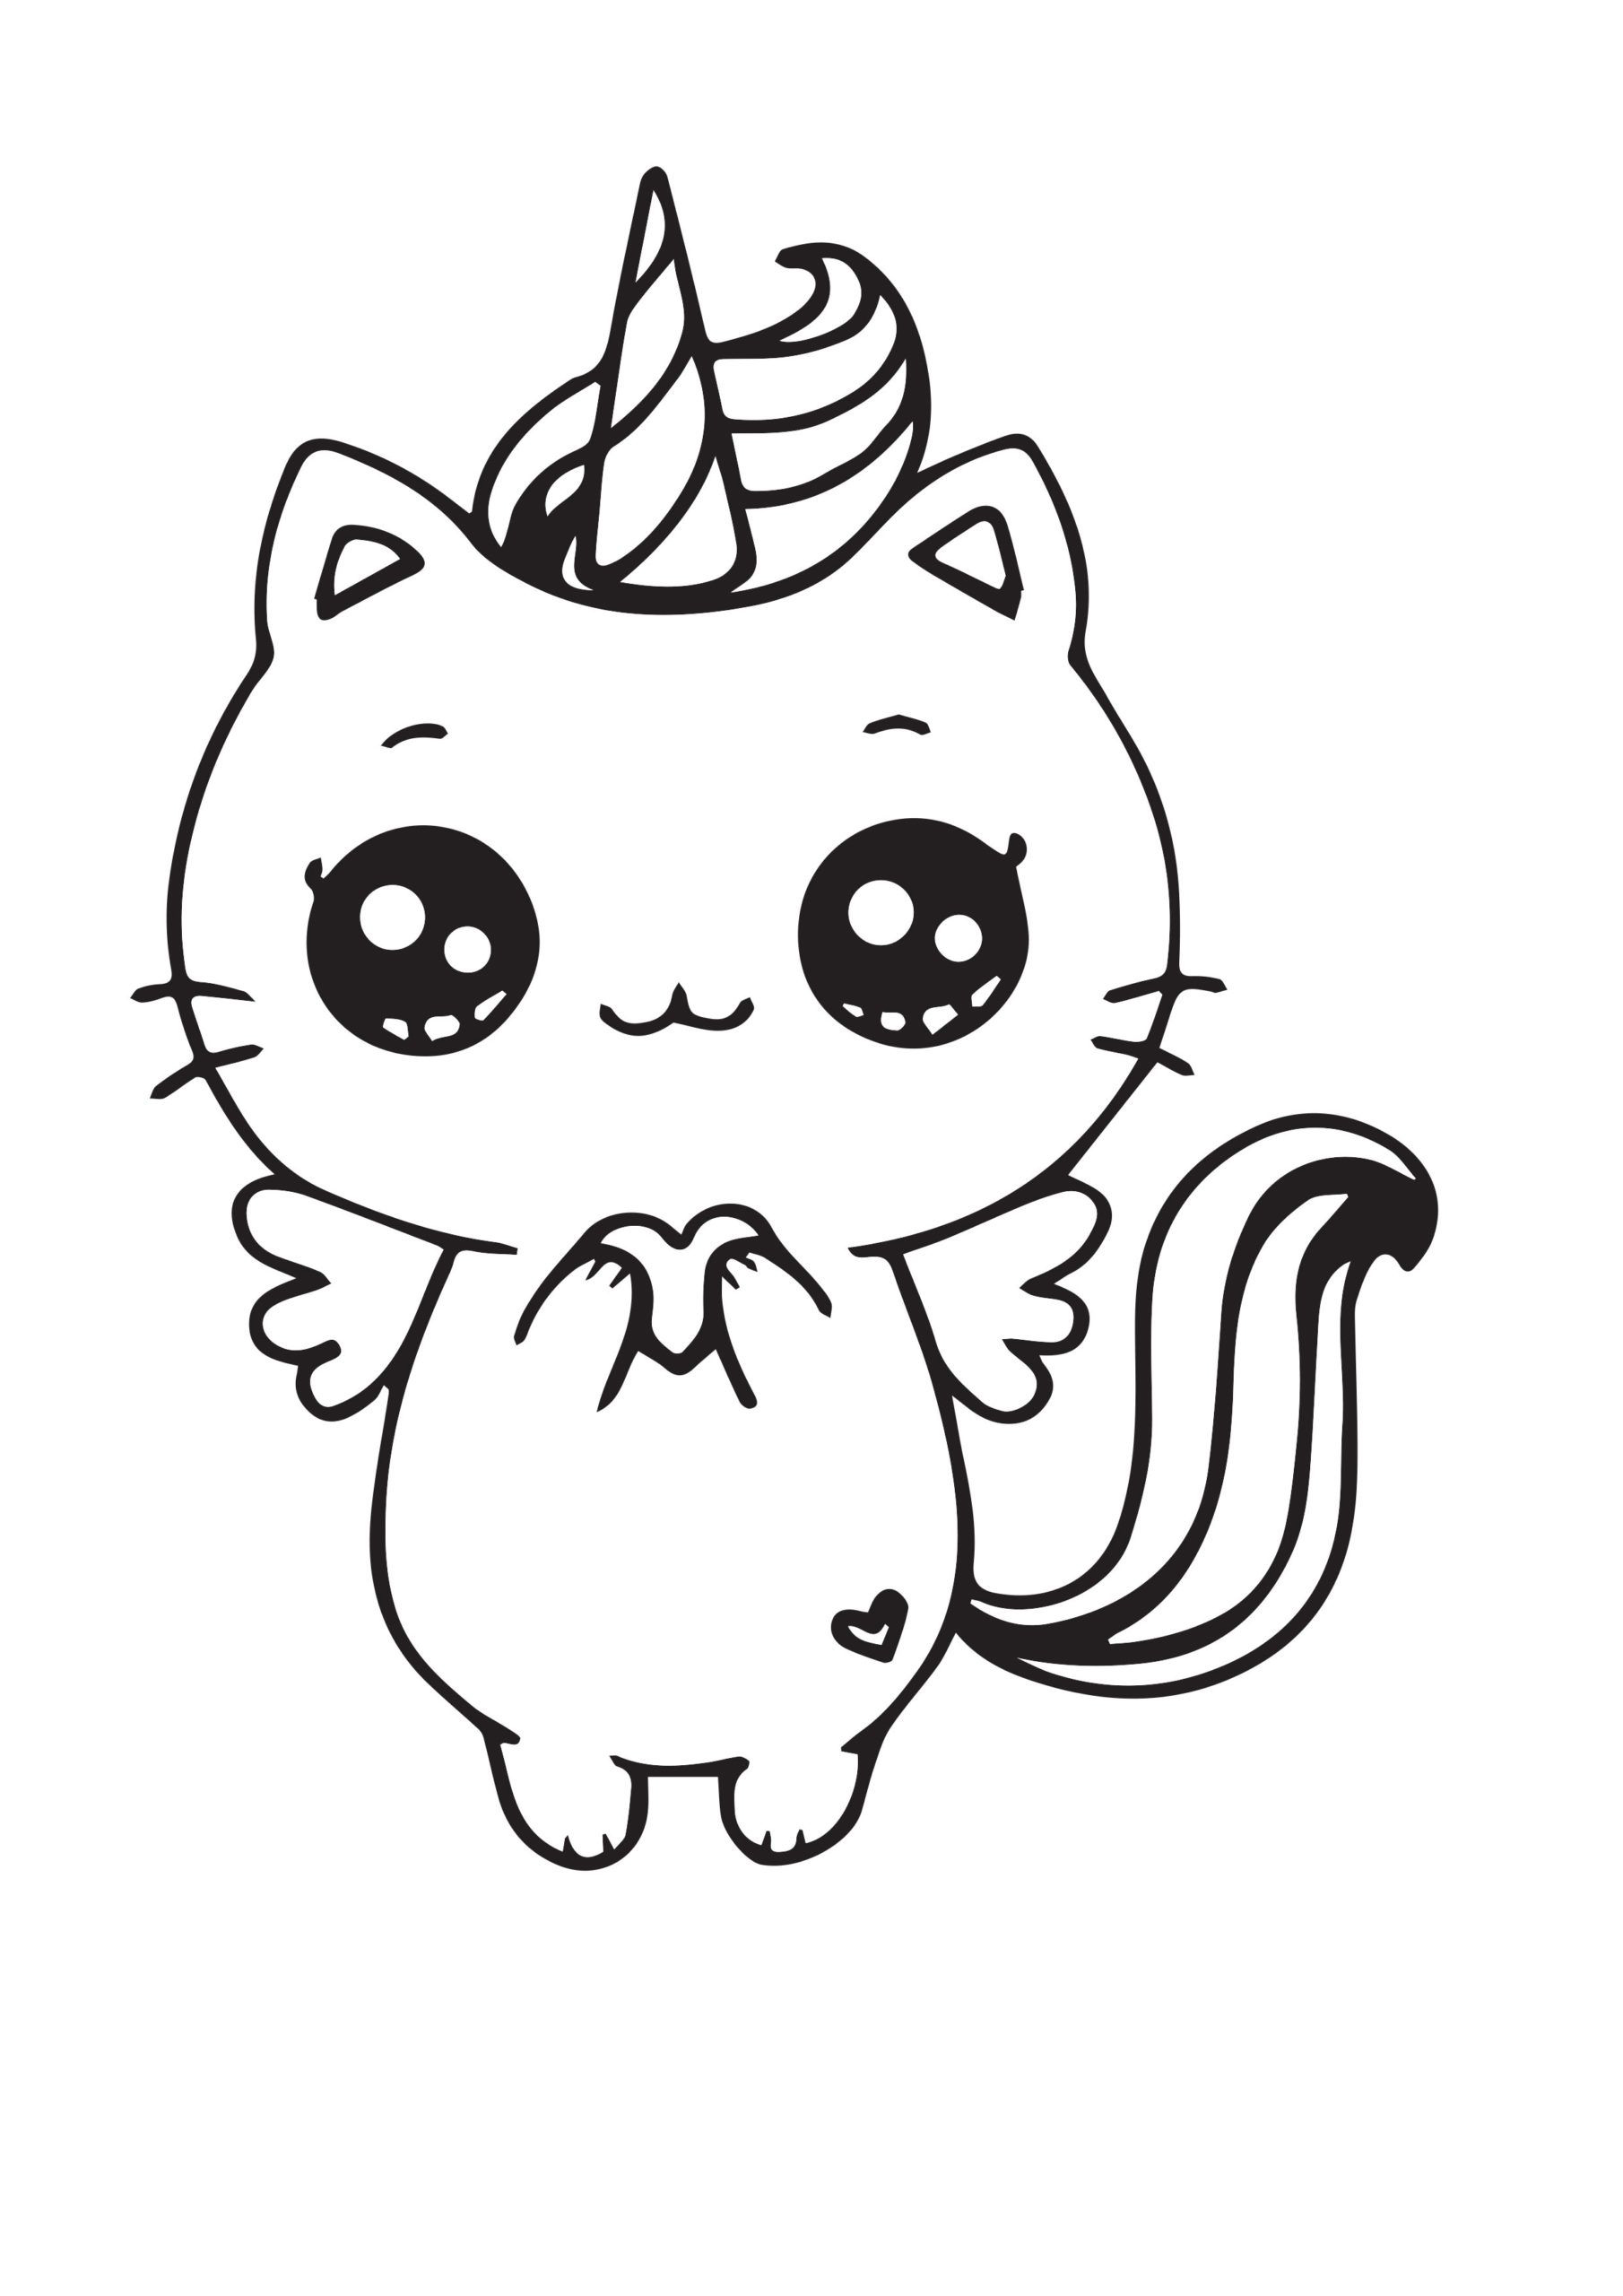 Printable The unicorn cat enchants with its cute smile and big eyes Coloring Page for kids.